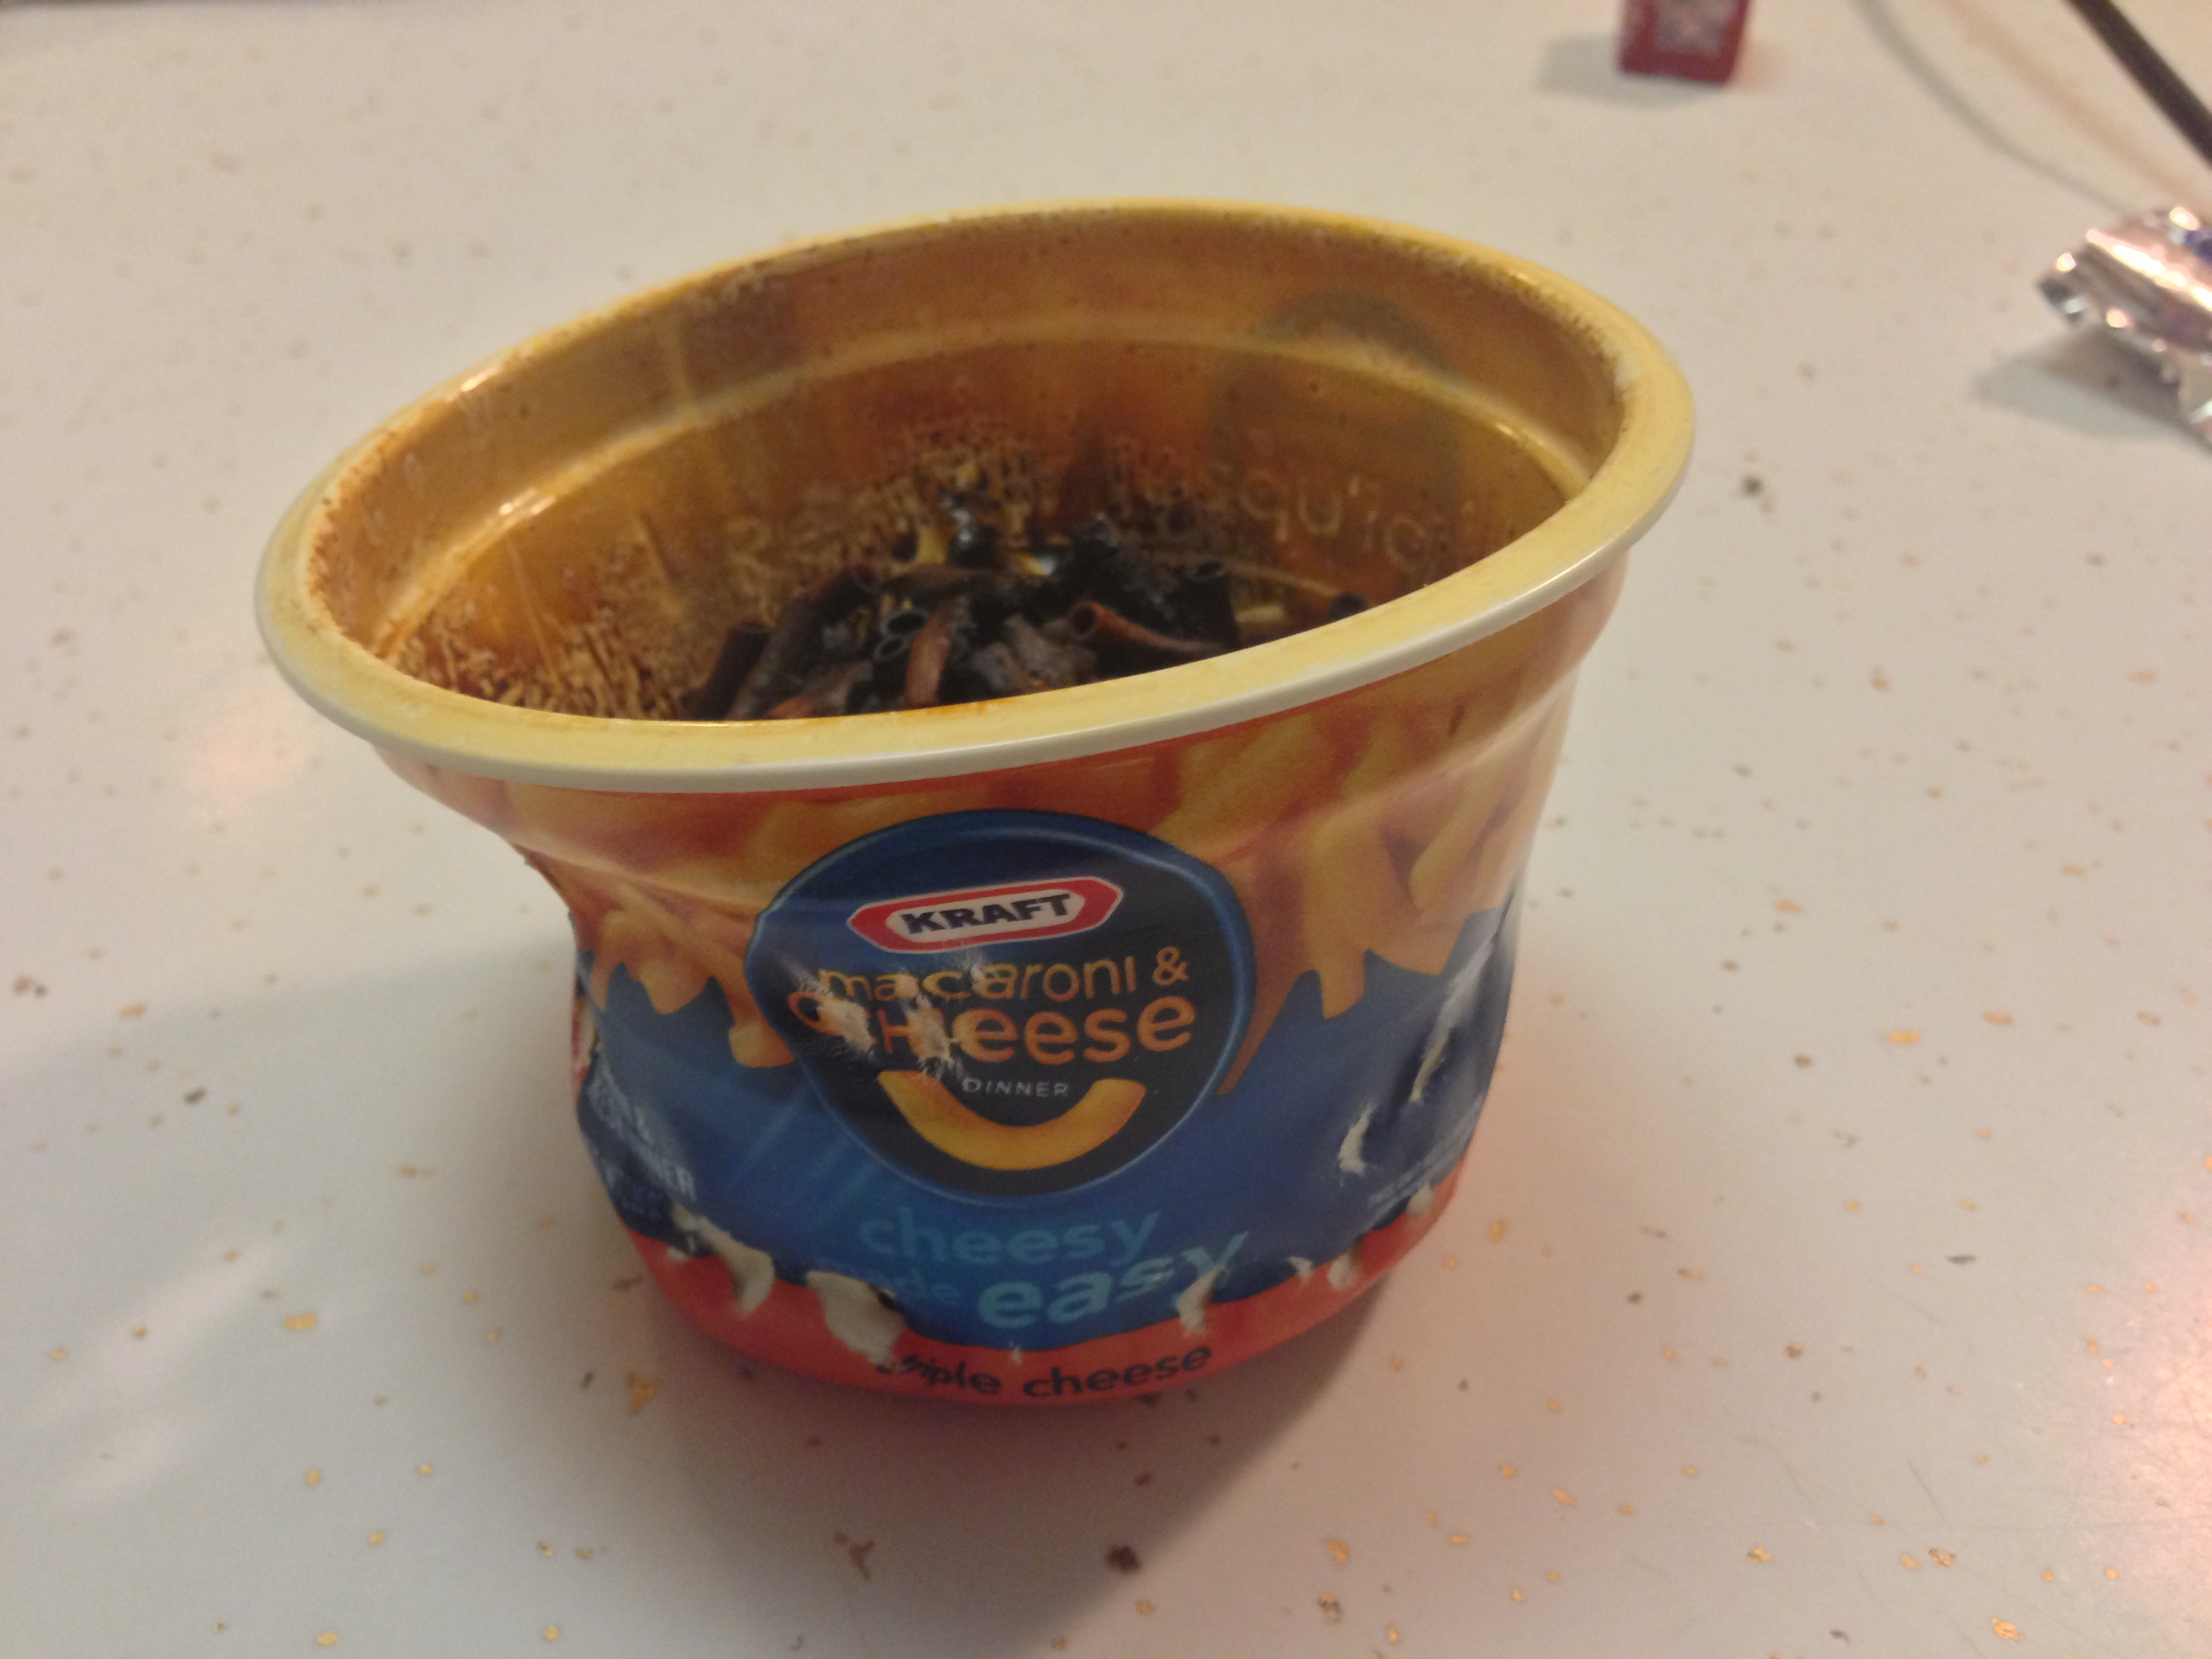 how bad is kraft mac and cheese for you